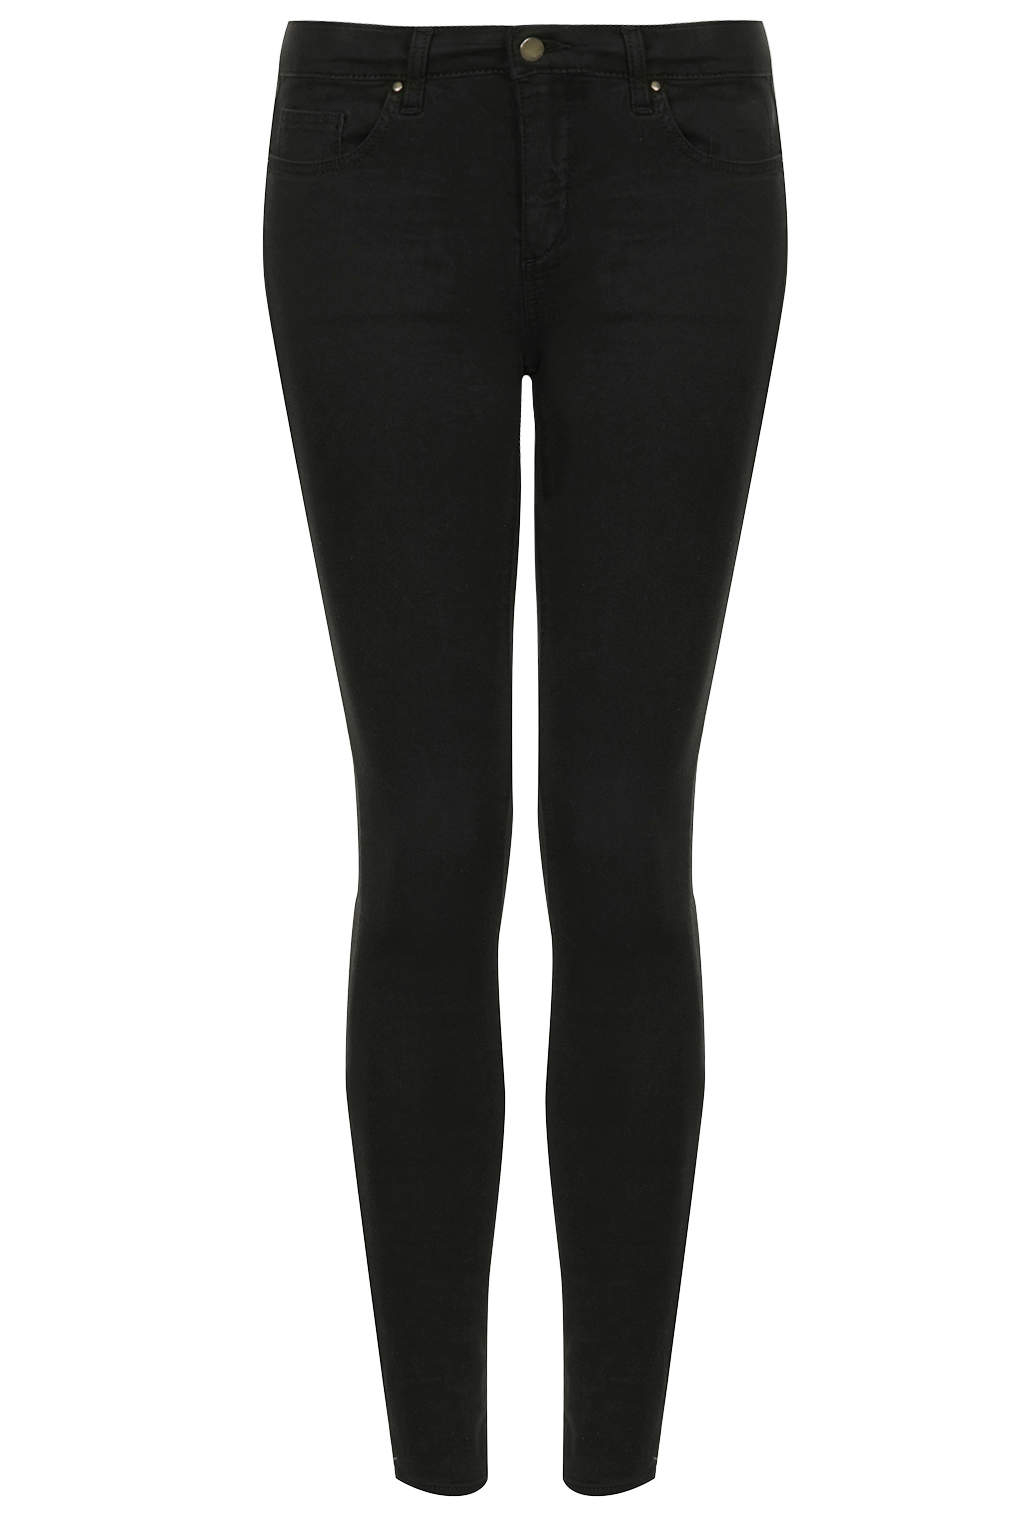 Lyst - Topshop Moto Low Rise Leigh Jeans in Black